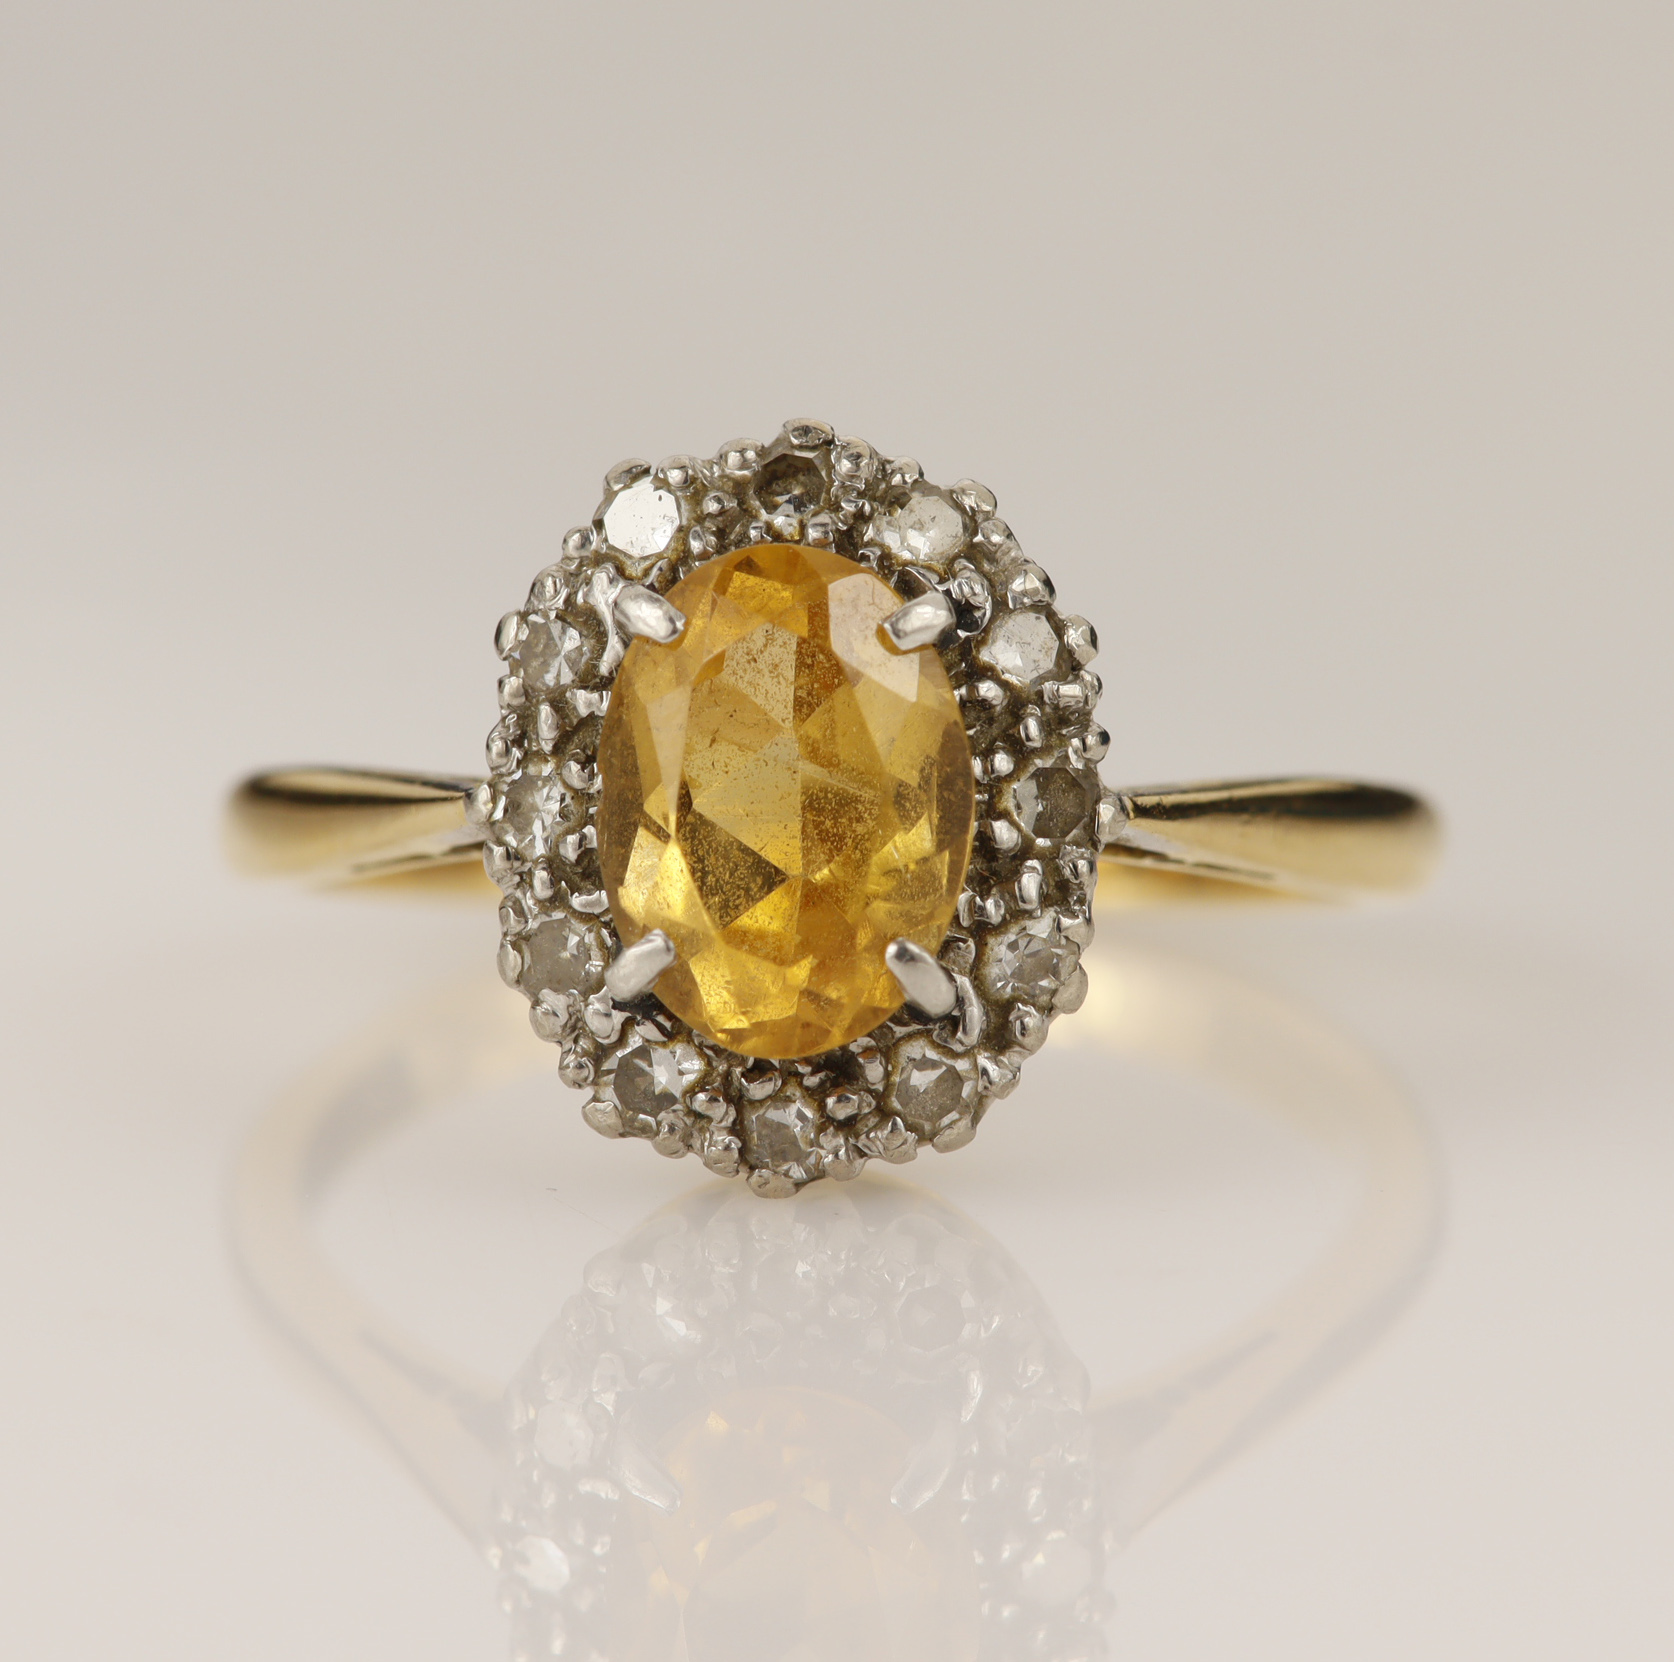 Yellow gold (tests 18ct) diamond and topaz cluster ring, oval mixed cut golden topaz measures 7.